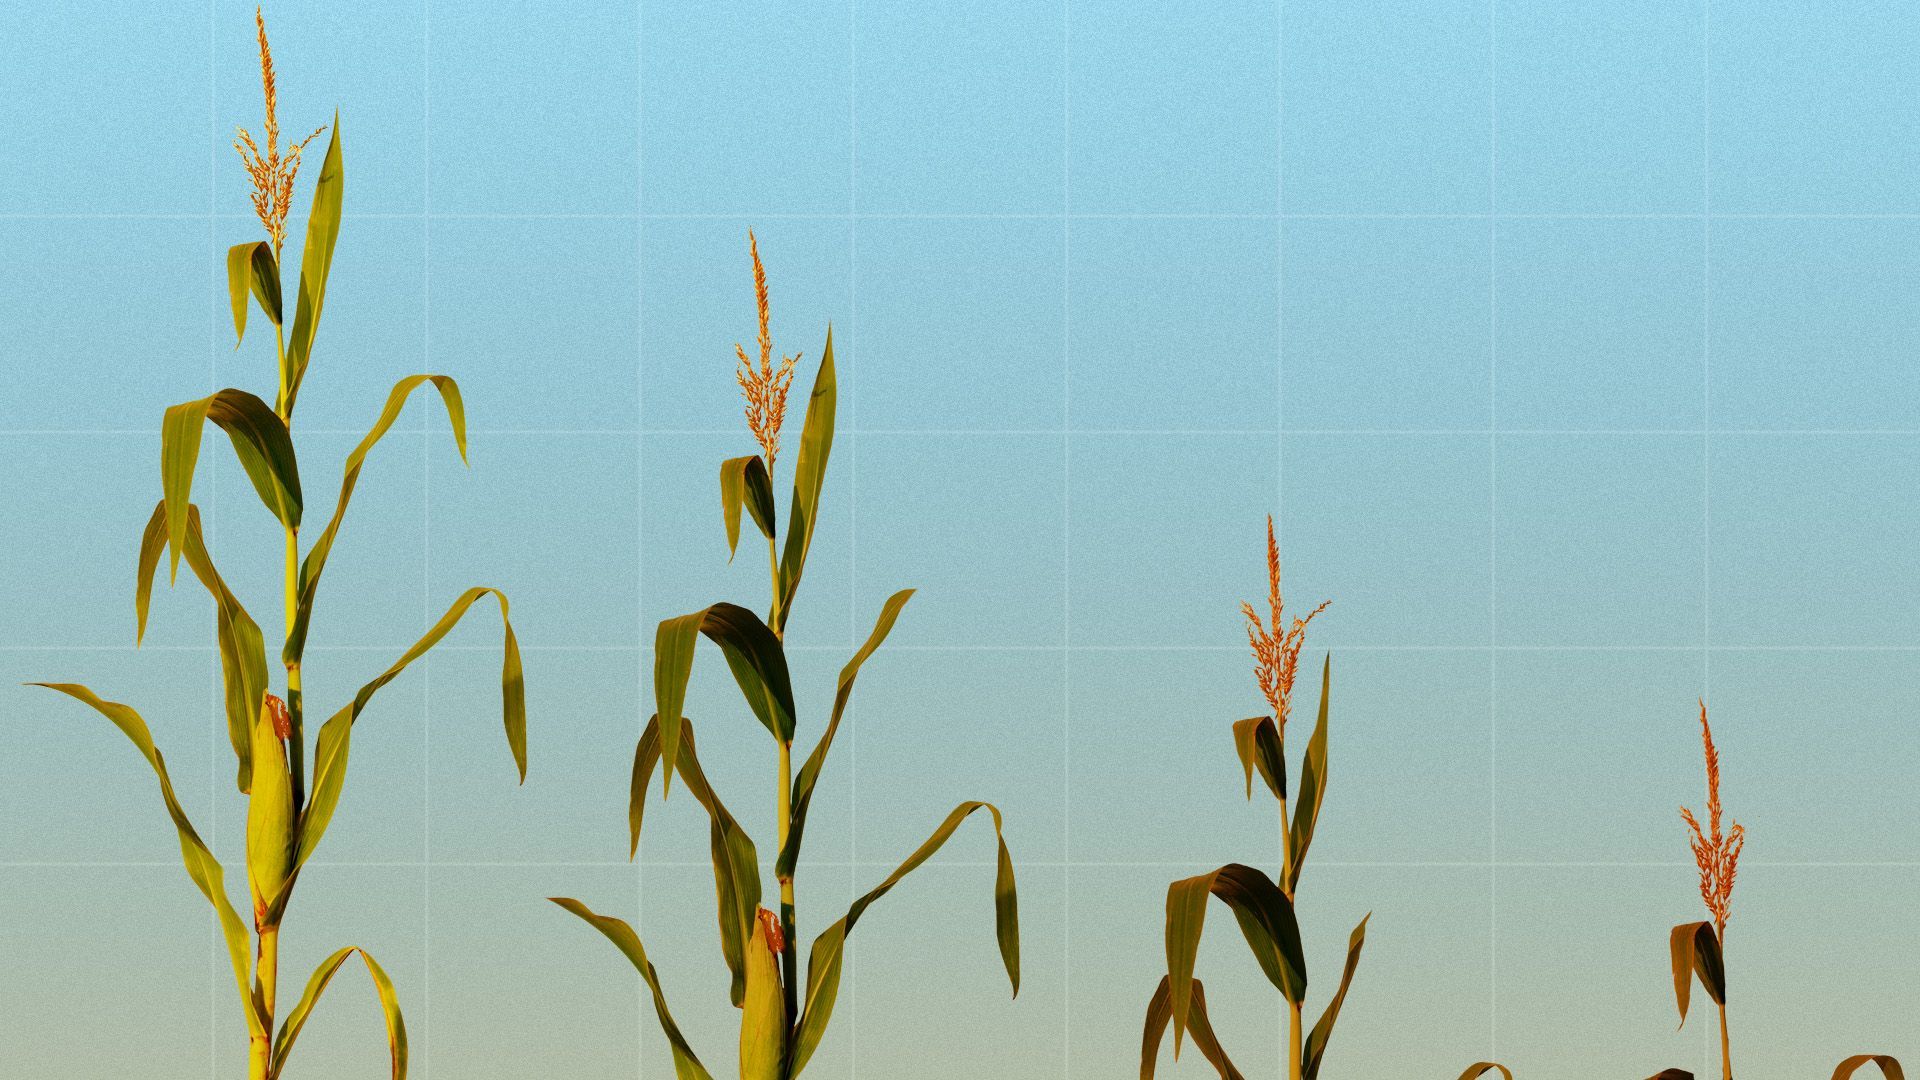 Illustration of a progressively dying crop of corn on a grid